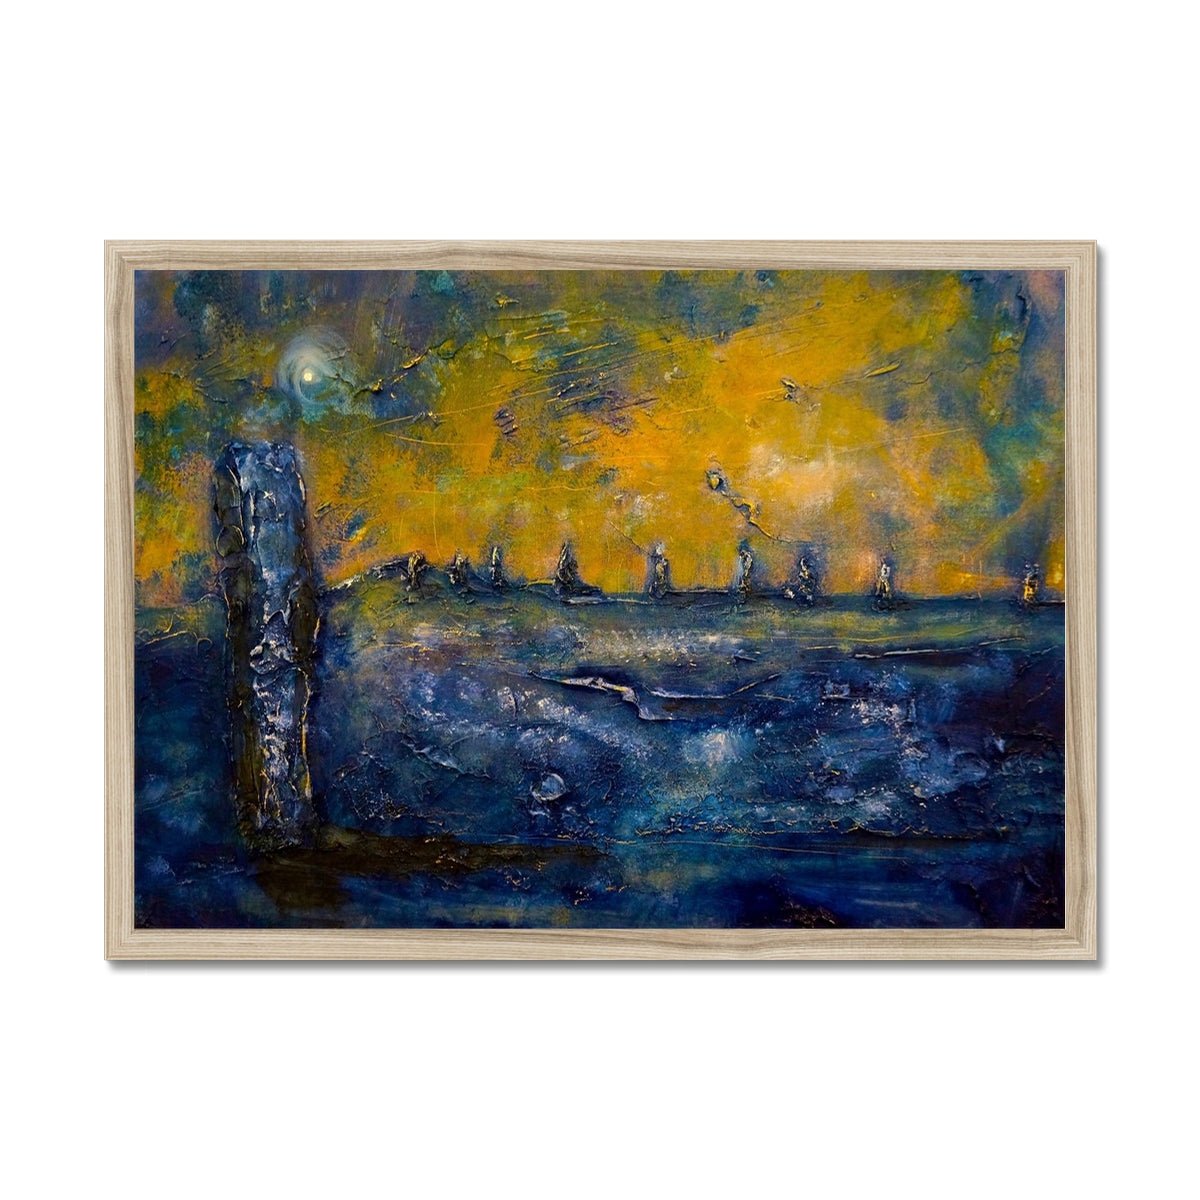 Brodgar Moonlight Orkney Painting | Framed Prints From Scotland-Framed Prints-Orkney Art Gallery-A2 Landscape-Natural Frame-Paintings, Prints, Homeware, Art Gifts From Scotland By Scottish Artist Kevin Hunter